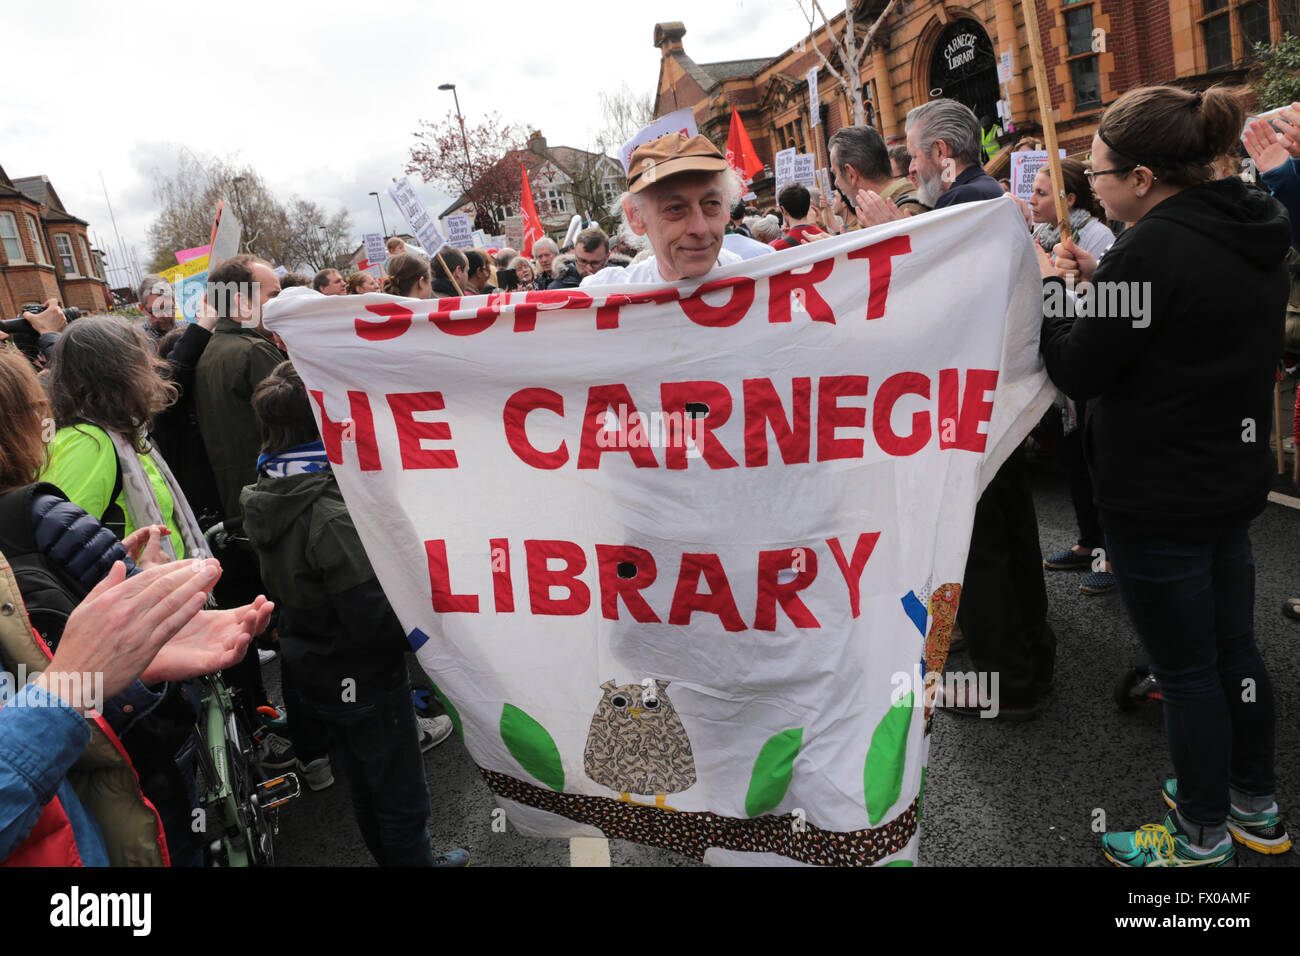 Lambeth, London, UK. 09th Apr, 2016. Defend the ten protest march against proposed changes to Lambeth library services including Carnegie library in Herne Hill. Carnegie library was occupied for 10 days since Lambeth closed the library to convert the building to a 'heatlhy living centre' with gym. The occupation ended today and over 1000 demonstraters marched from Carnegie library to Brixton's Tate library via Minet Library., services10 days since Lambeth closed the library to convert the building to a 'heatlhy living centre' with gym. Credit:  David Stock/Alamy Live News Stock Photo